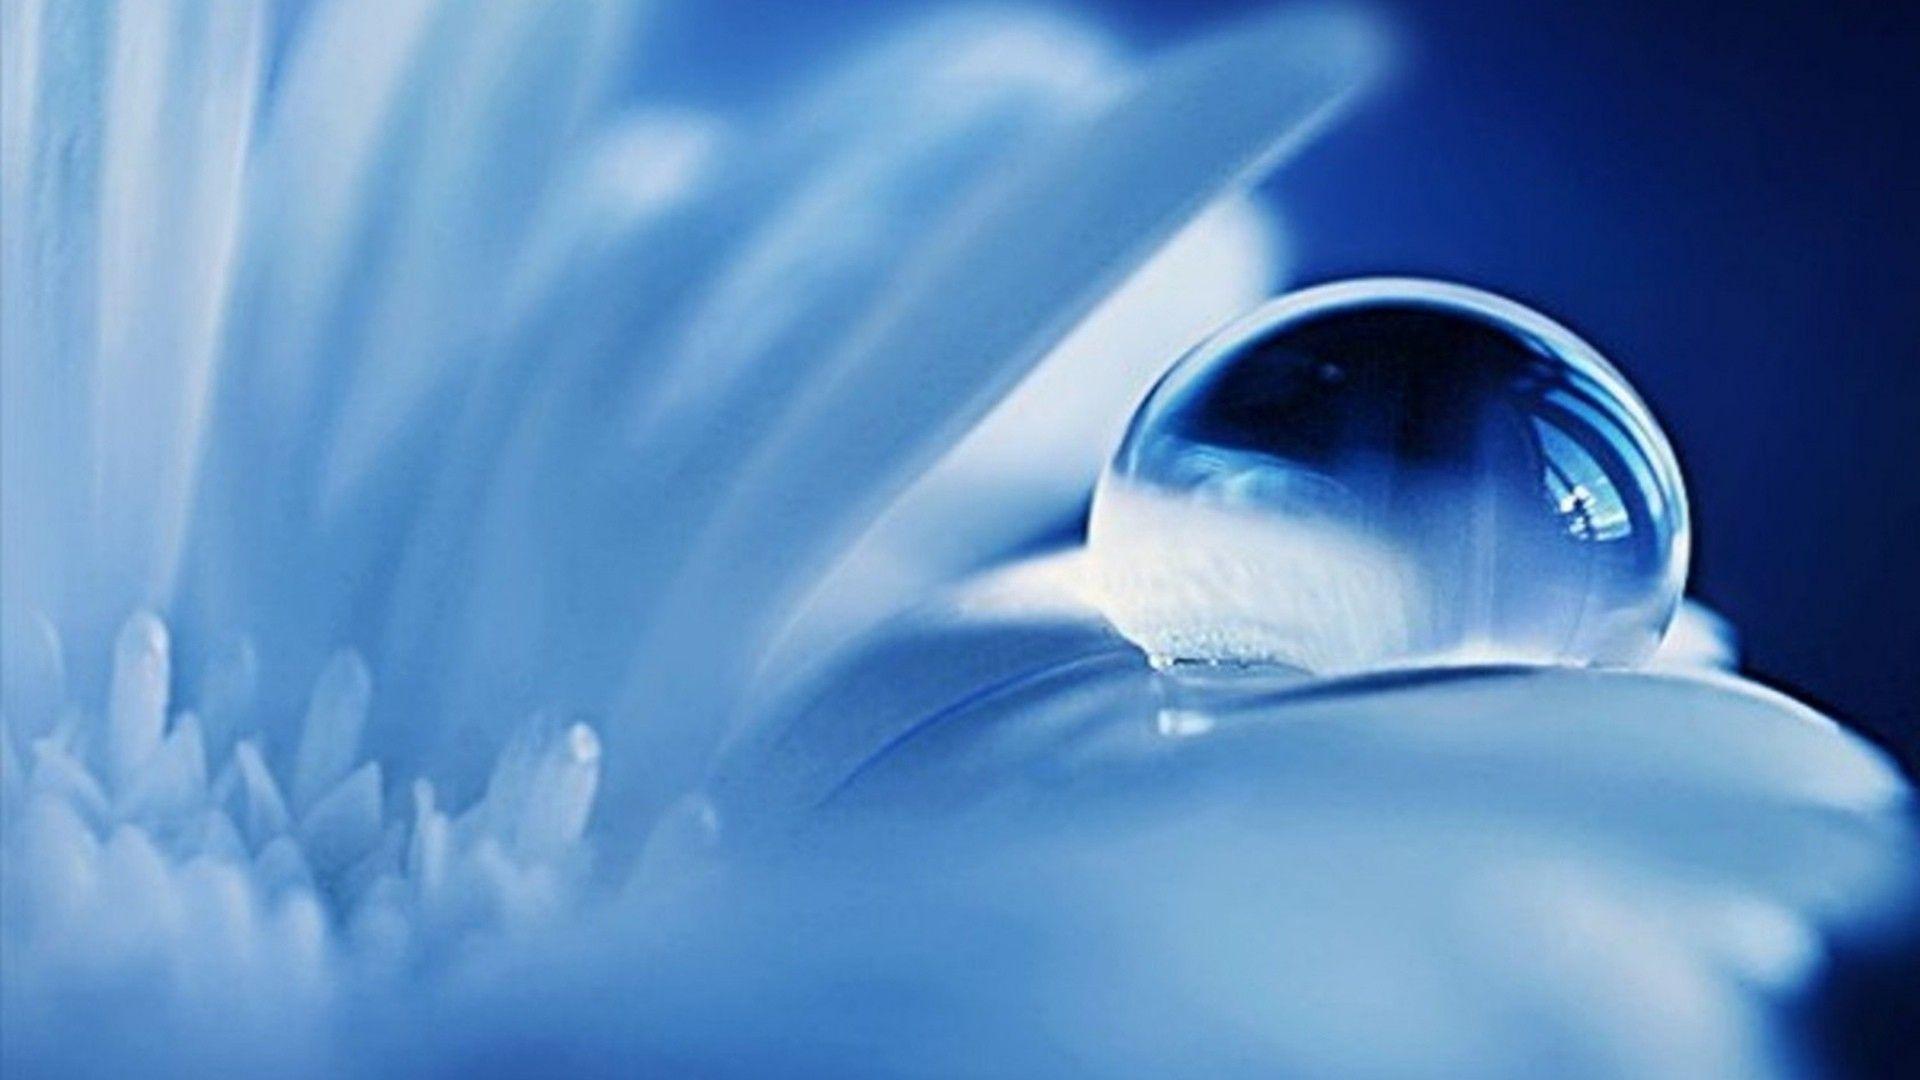 Water Droplet Backgrounds